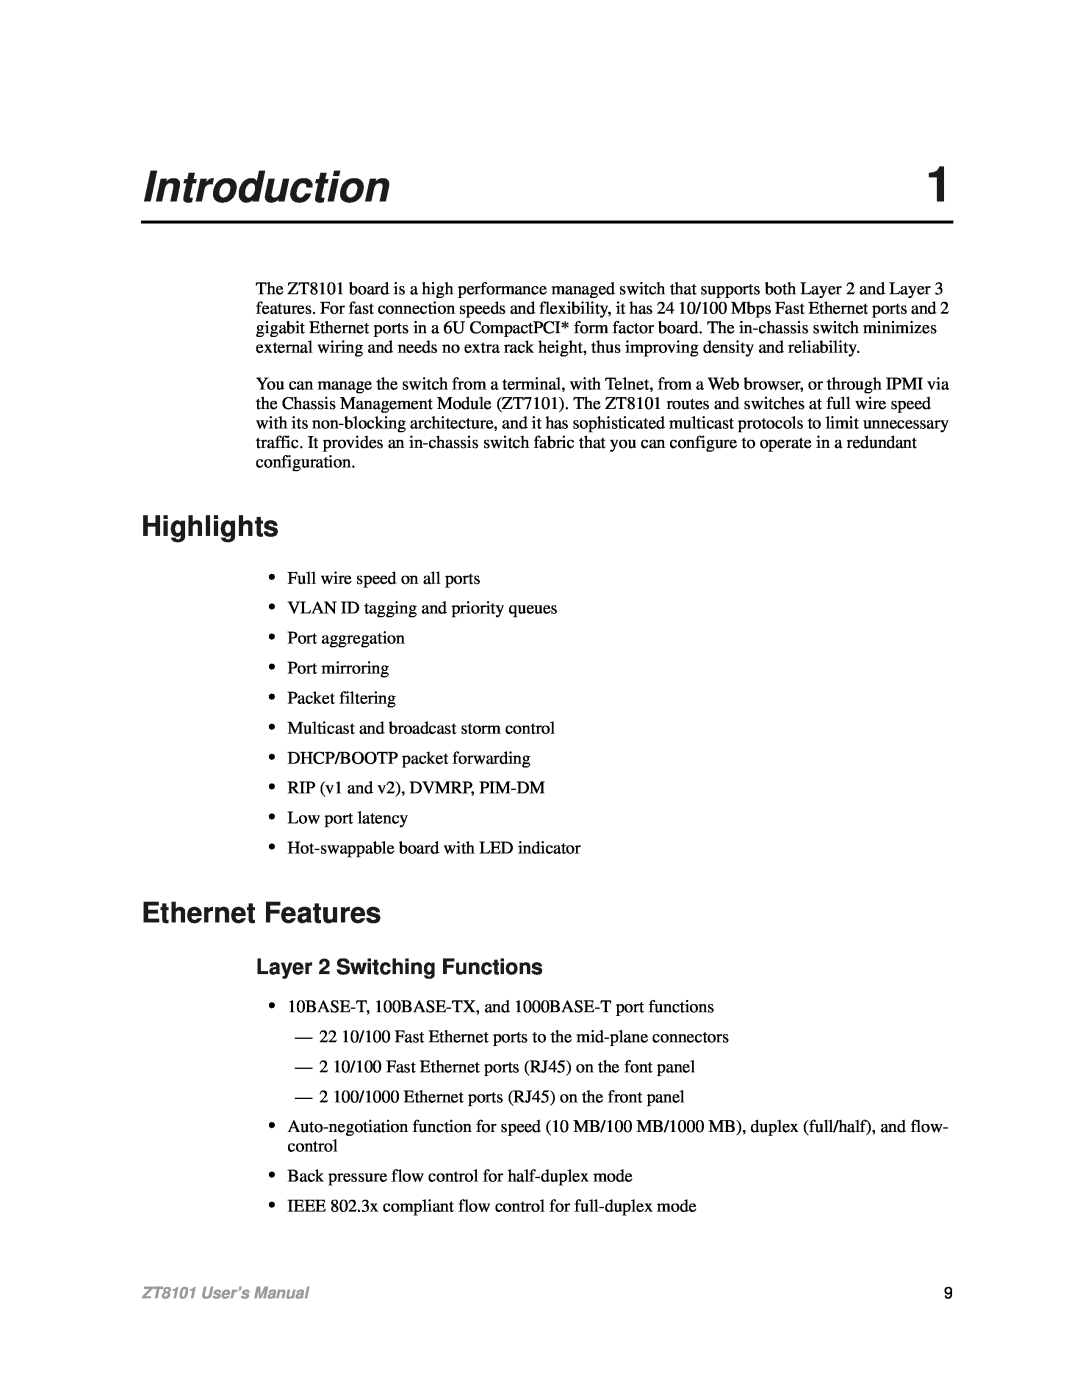 Intel ZT8101 user manual Introduction, Highlights, Ethernet Features, Layer 2 Switching Functions 